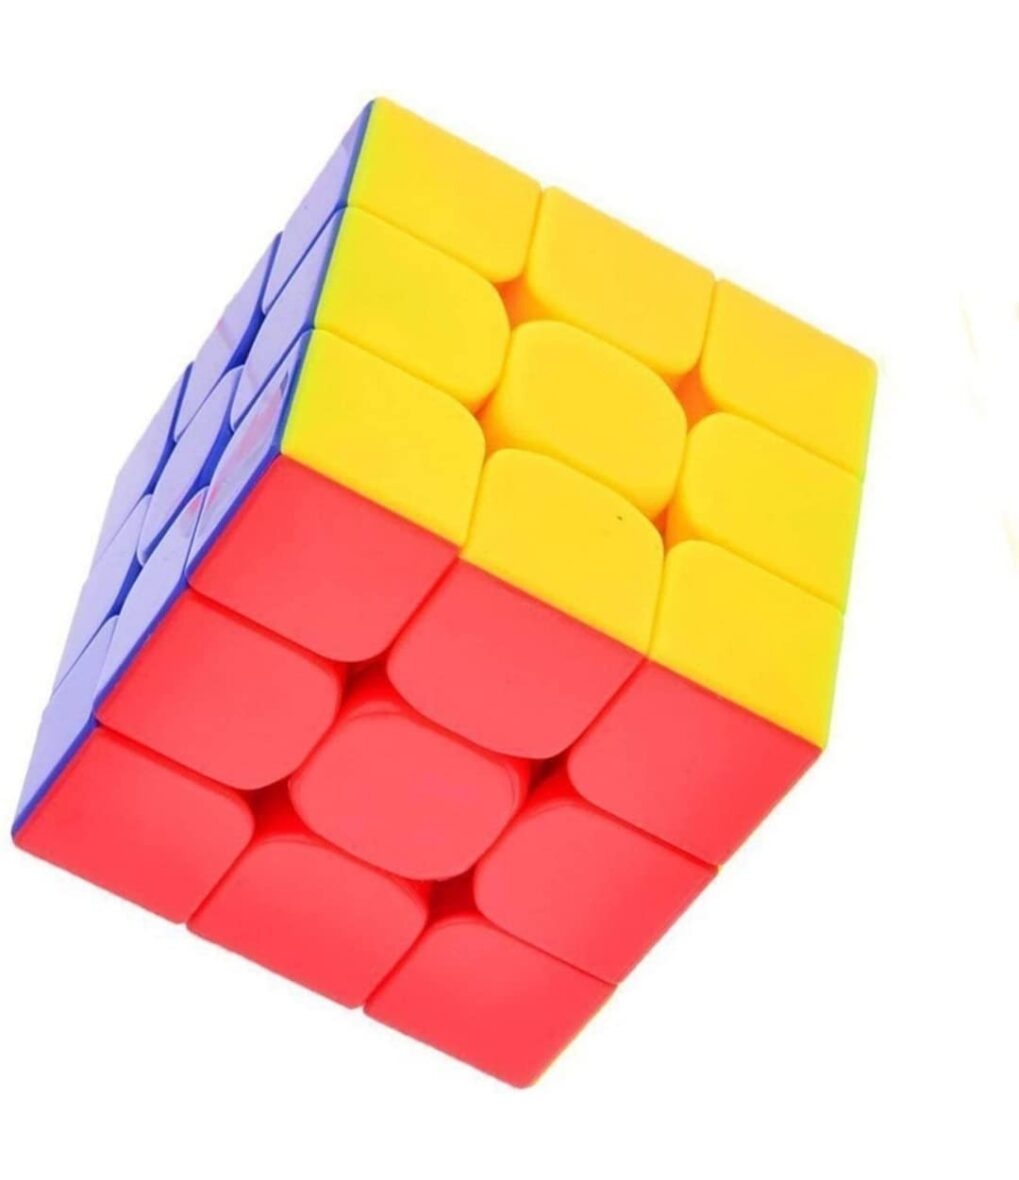 3×3 Speed Cube Easy Turning Magic Cube 3x3x3 Puzzle Cube Educational Brain Teaser Game